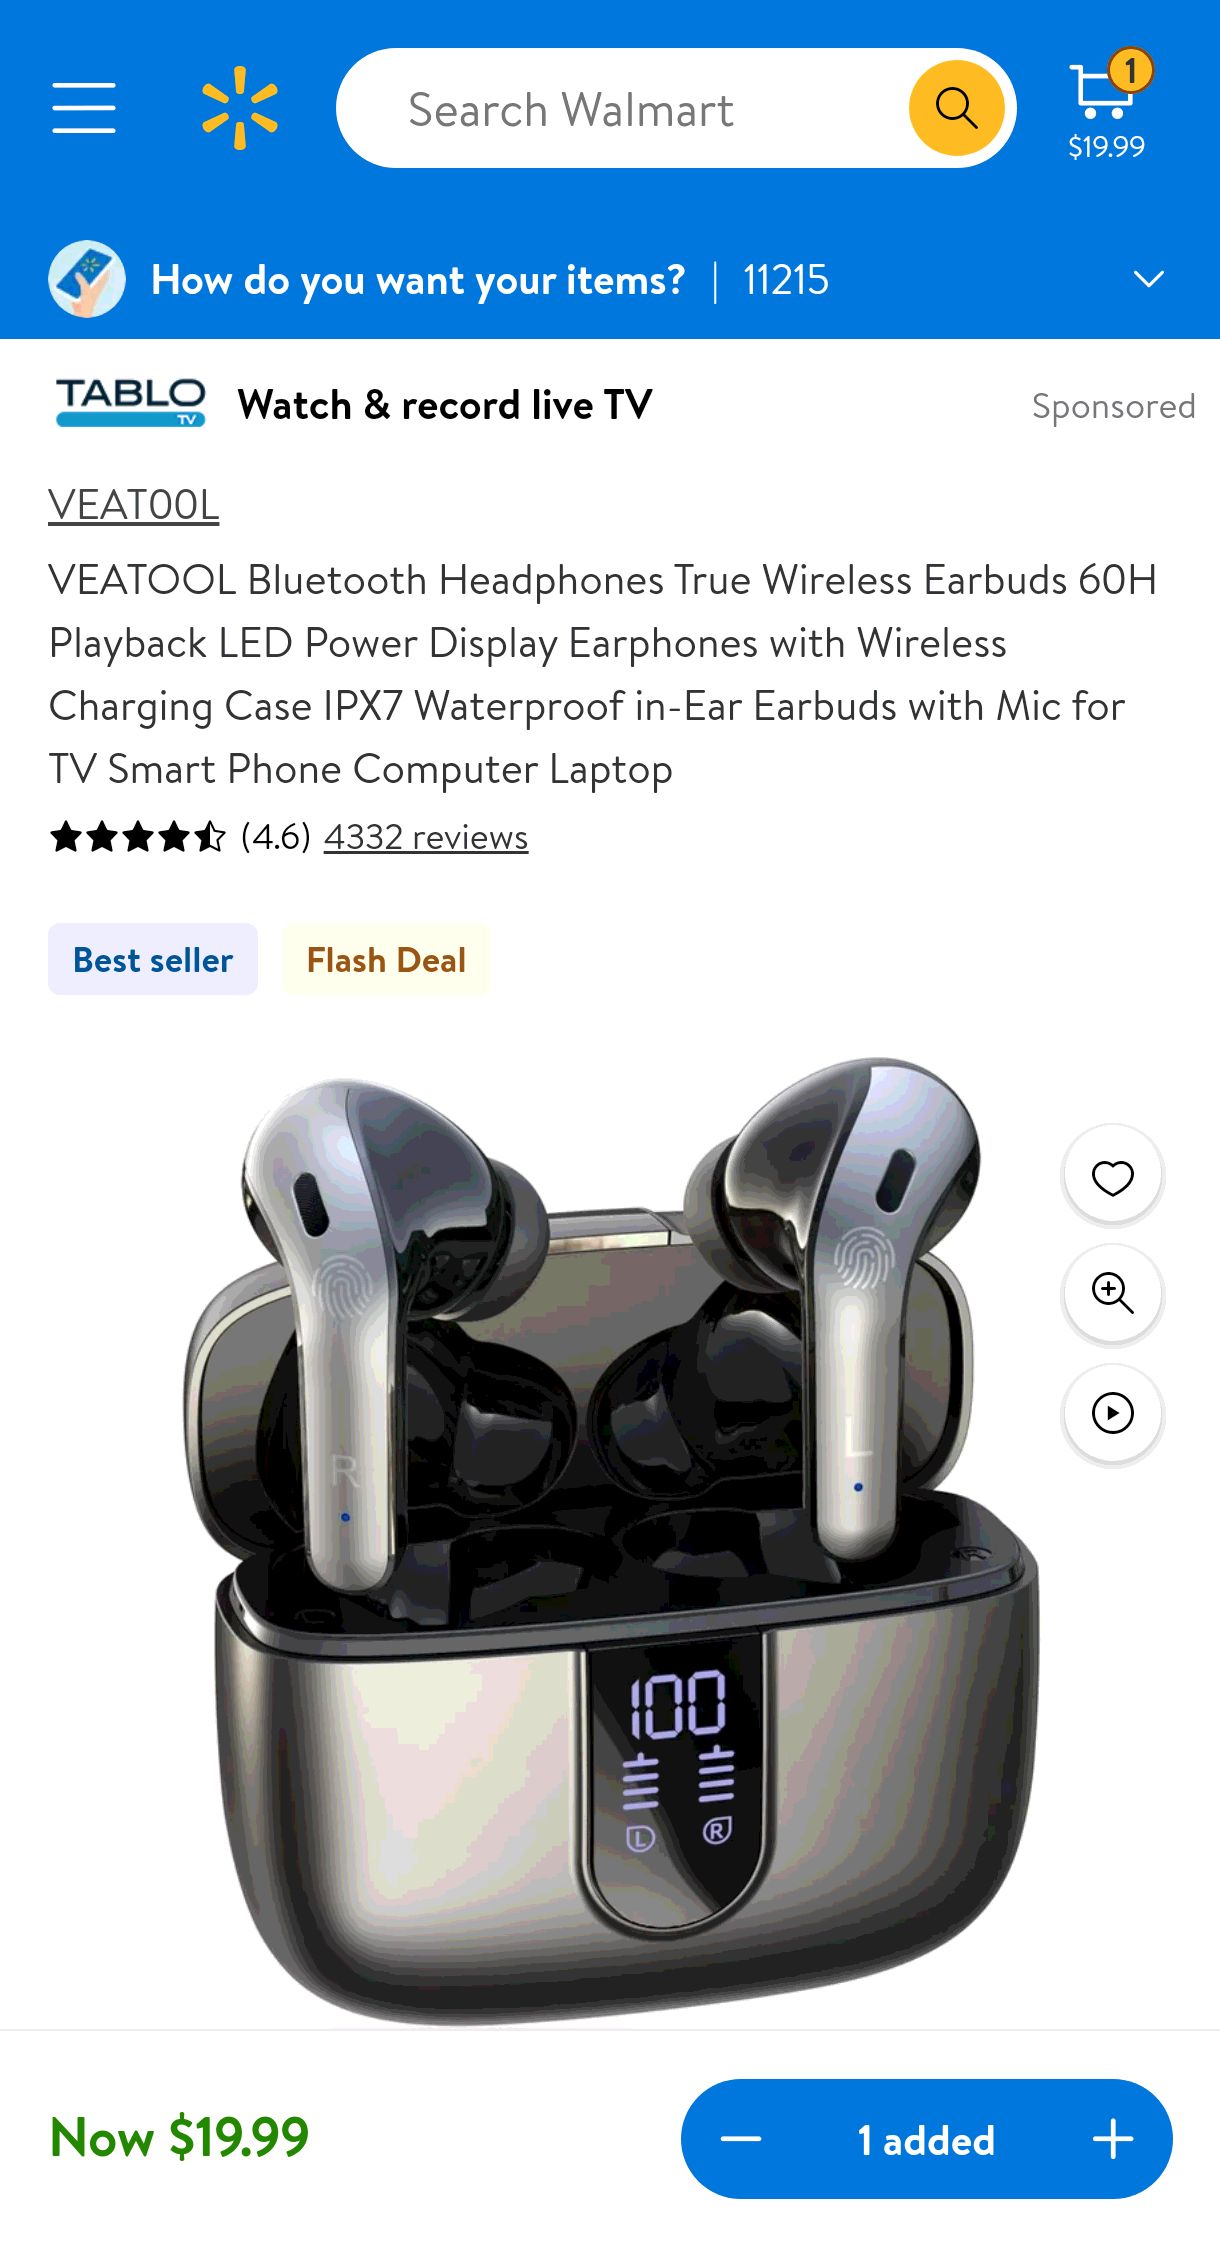 VEATOOL Bluetooth Headphones True Wireless Earbuds 60H Playback LED Power Display Earphones with Wireless Charging Case IPX7 Waterproof in-Ear Earbuds with Mic for TV Smart Phone Computer Laptop - Wal